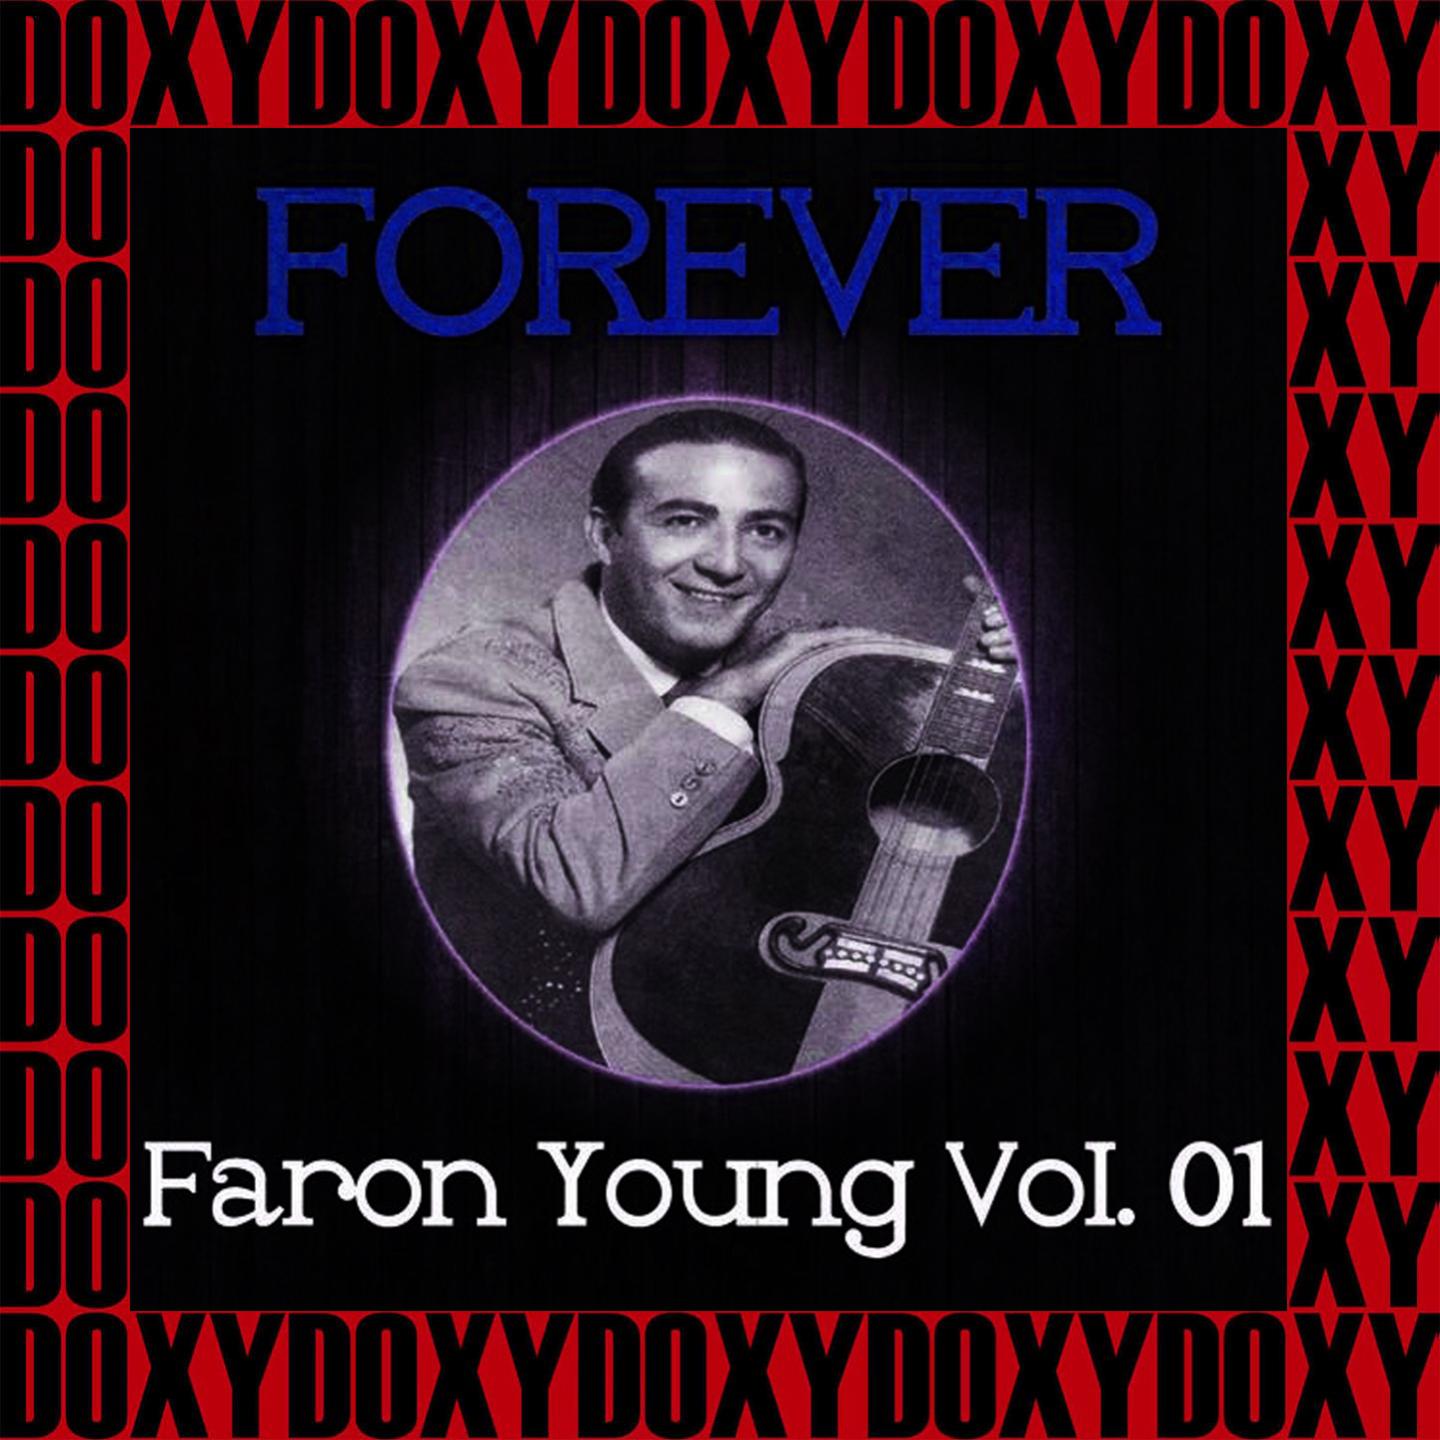 Forever Faron Young Vol. 1 (Remastered Version) (Doxy Collection)